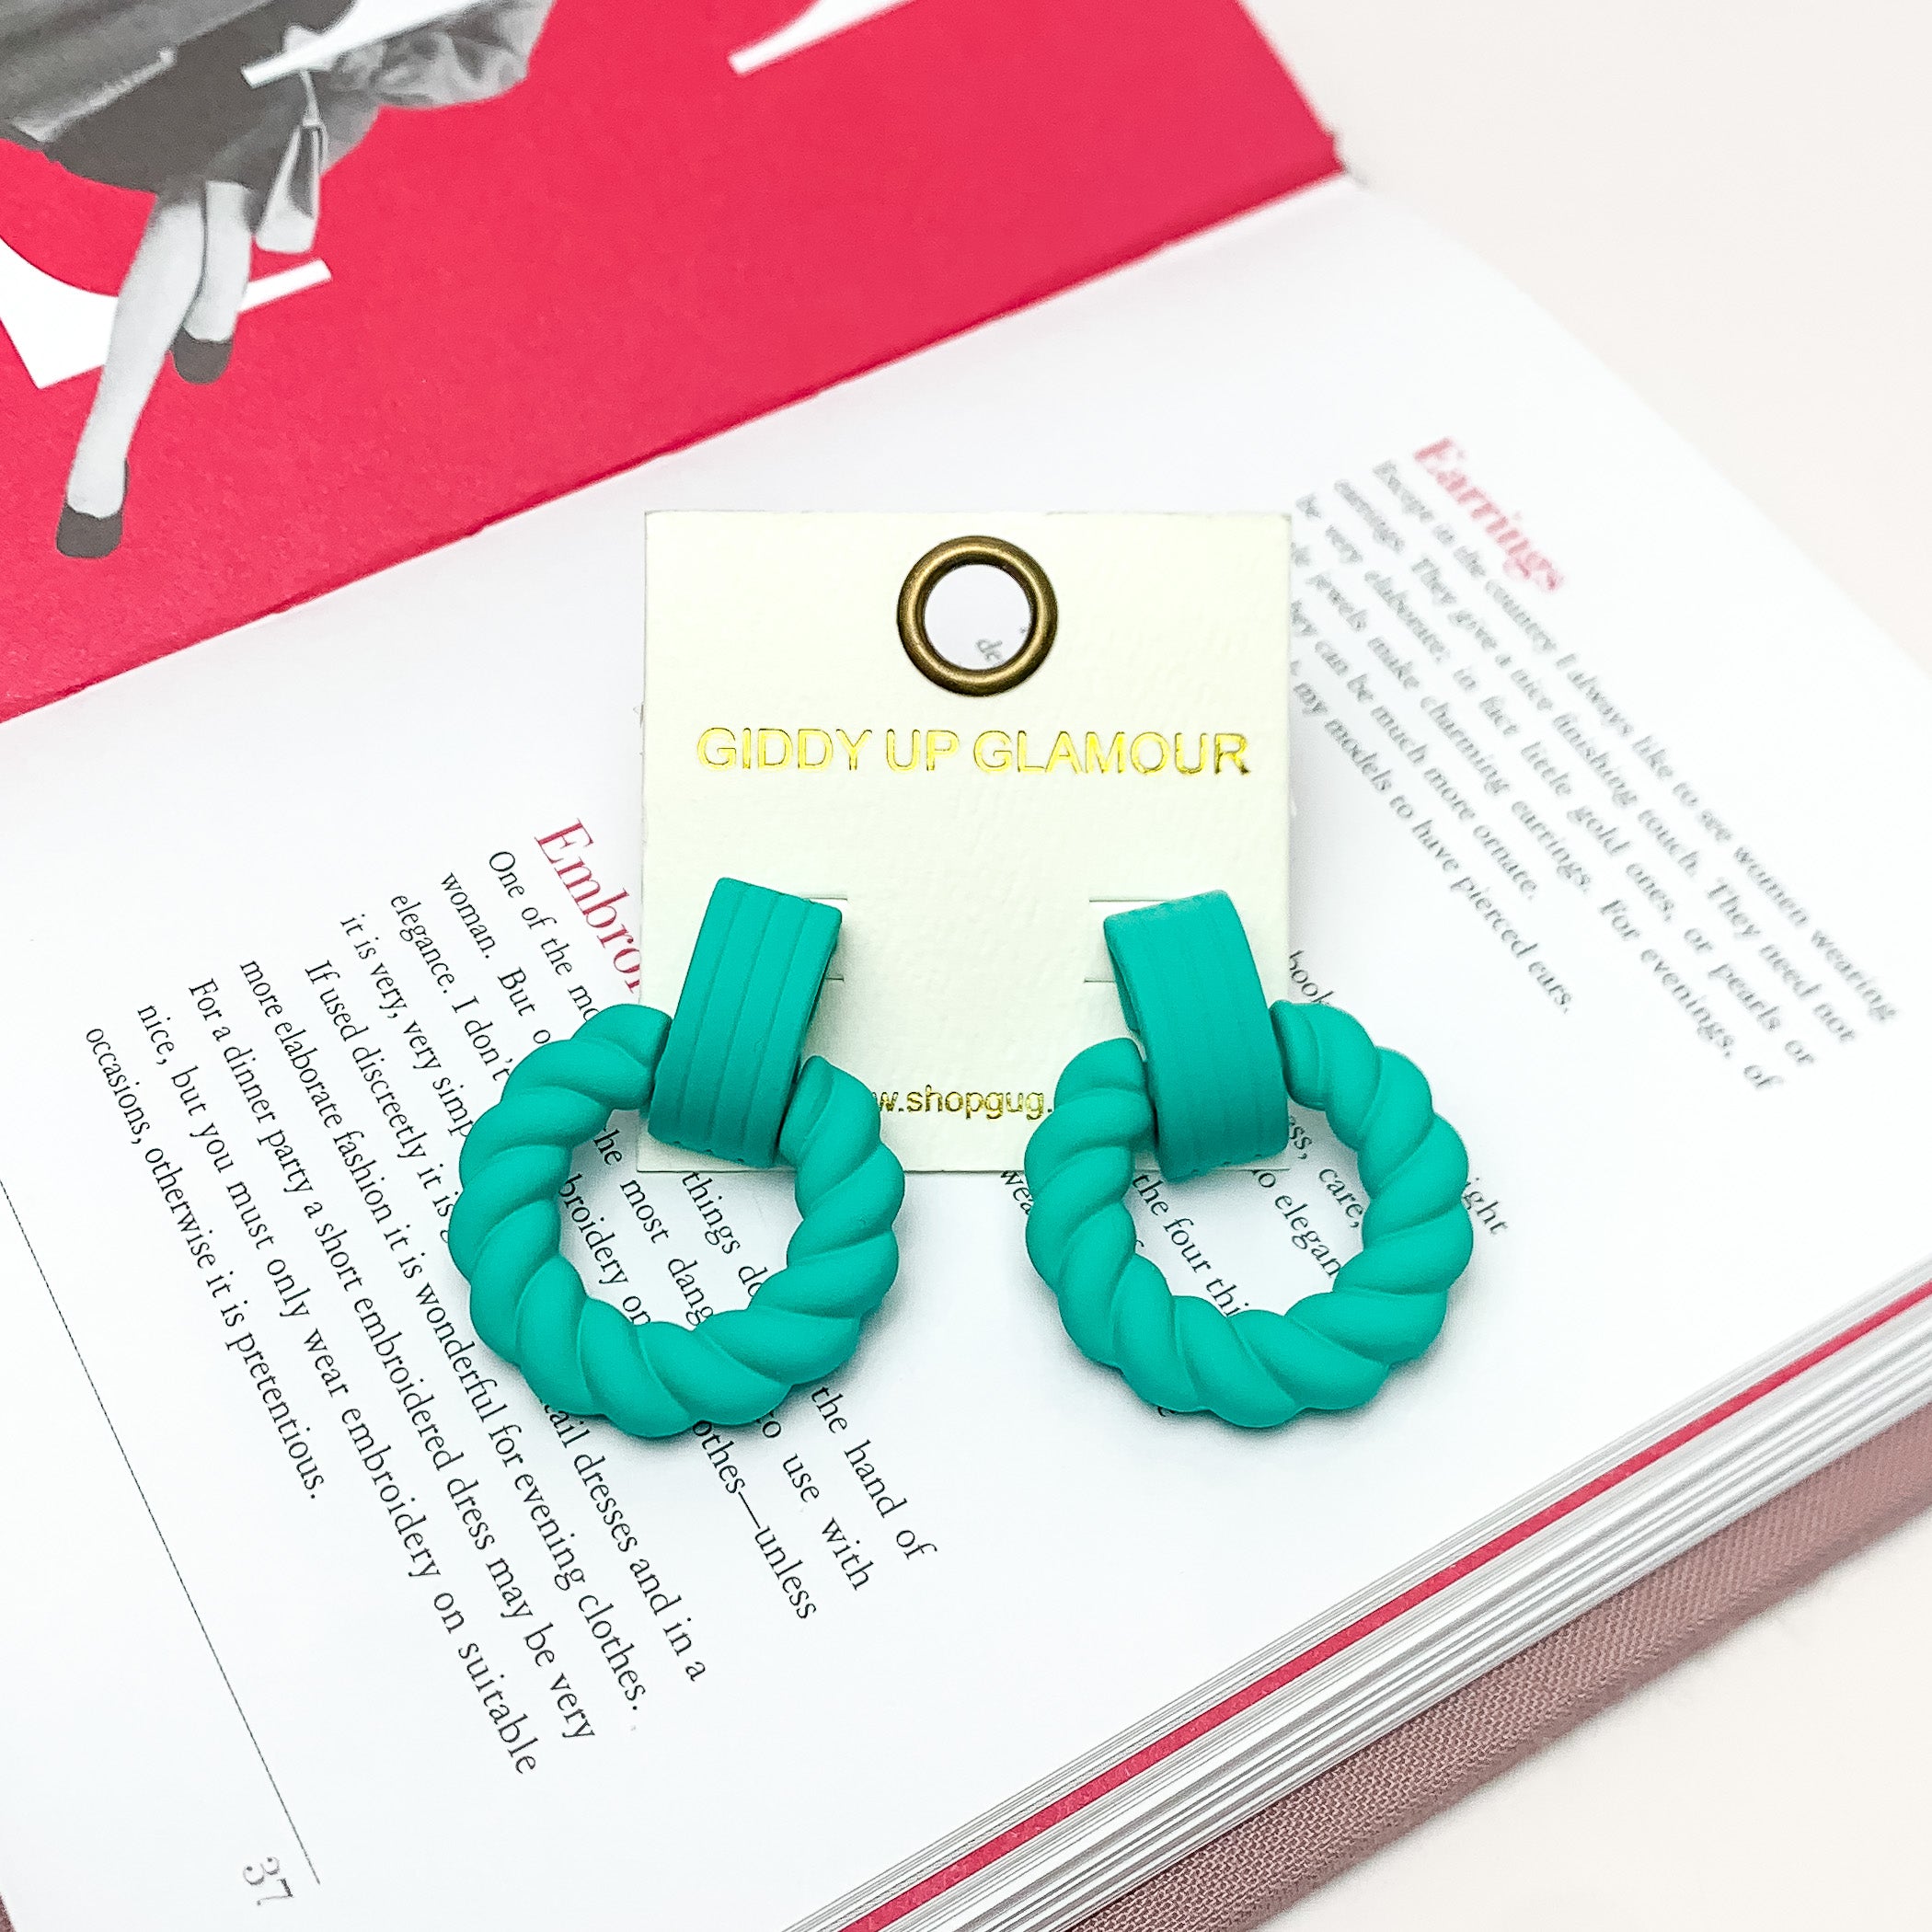 Made to Party Twisted Circle Earrings in Mint Green. Pictured on an open page of a book.